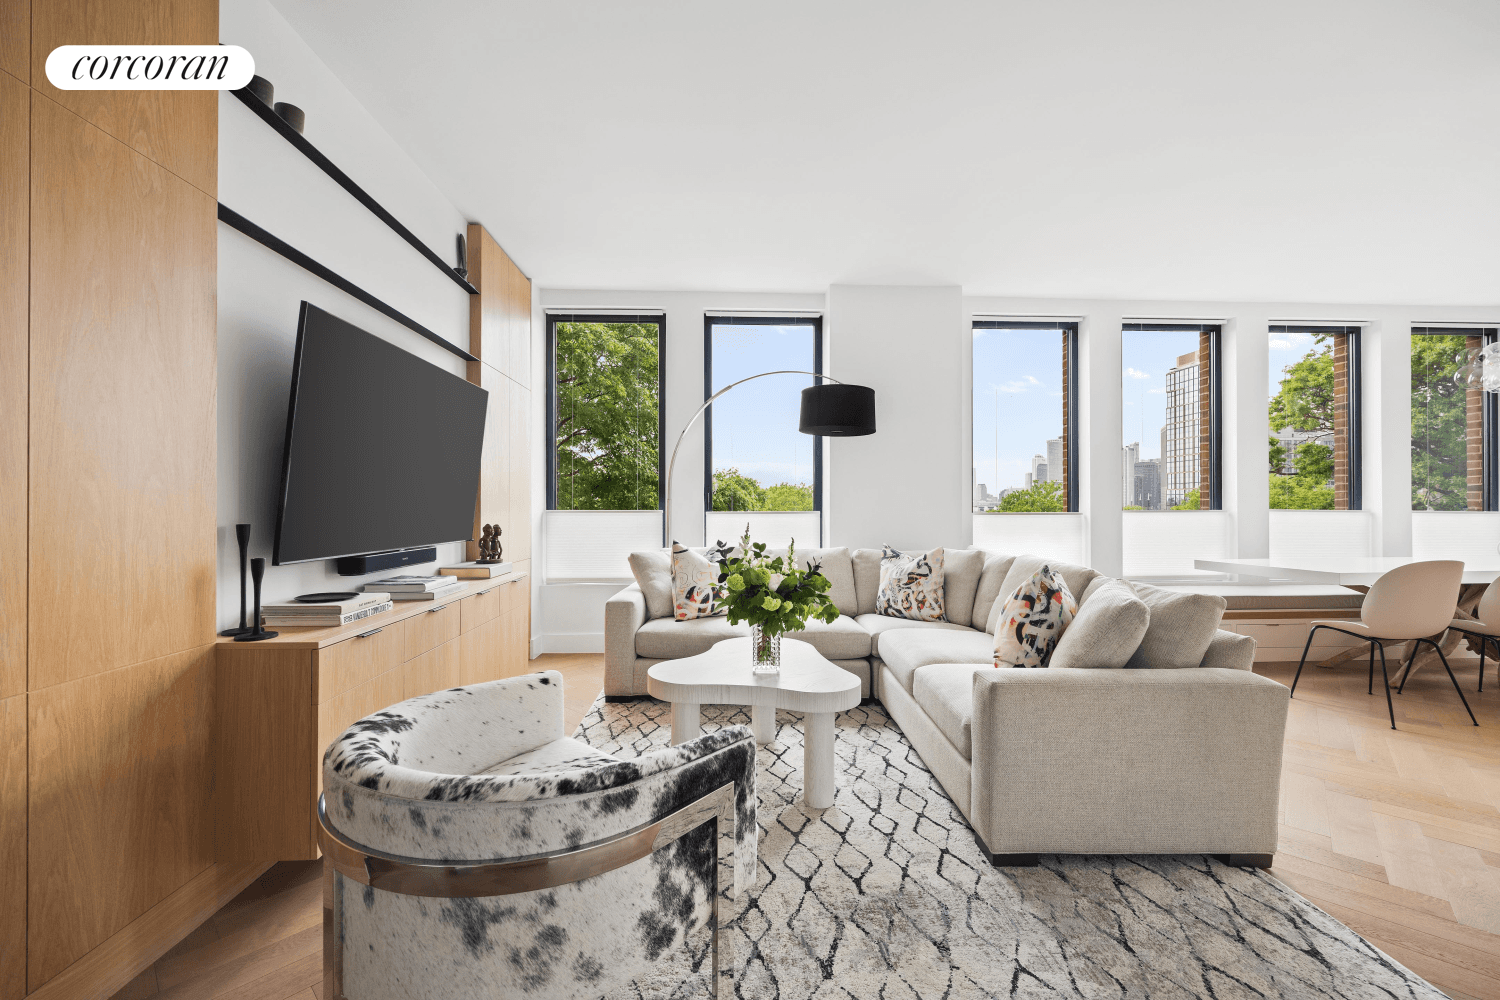 Welcome to Unit 3B, a spectacular 1, 477 SF, 3 bedroom, 2 bath home with northwest corner exposures in the heart of Brooklyn's legendary Cobble Hill.